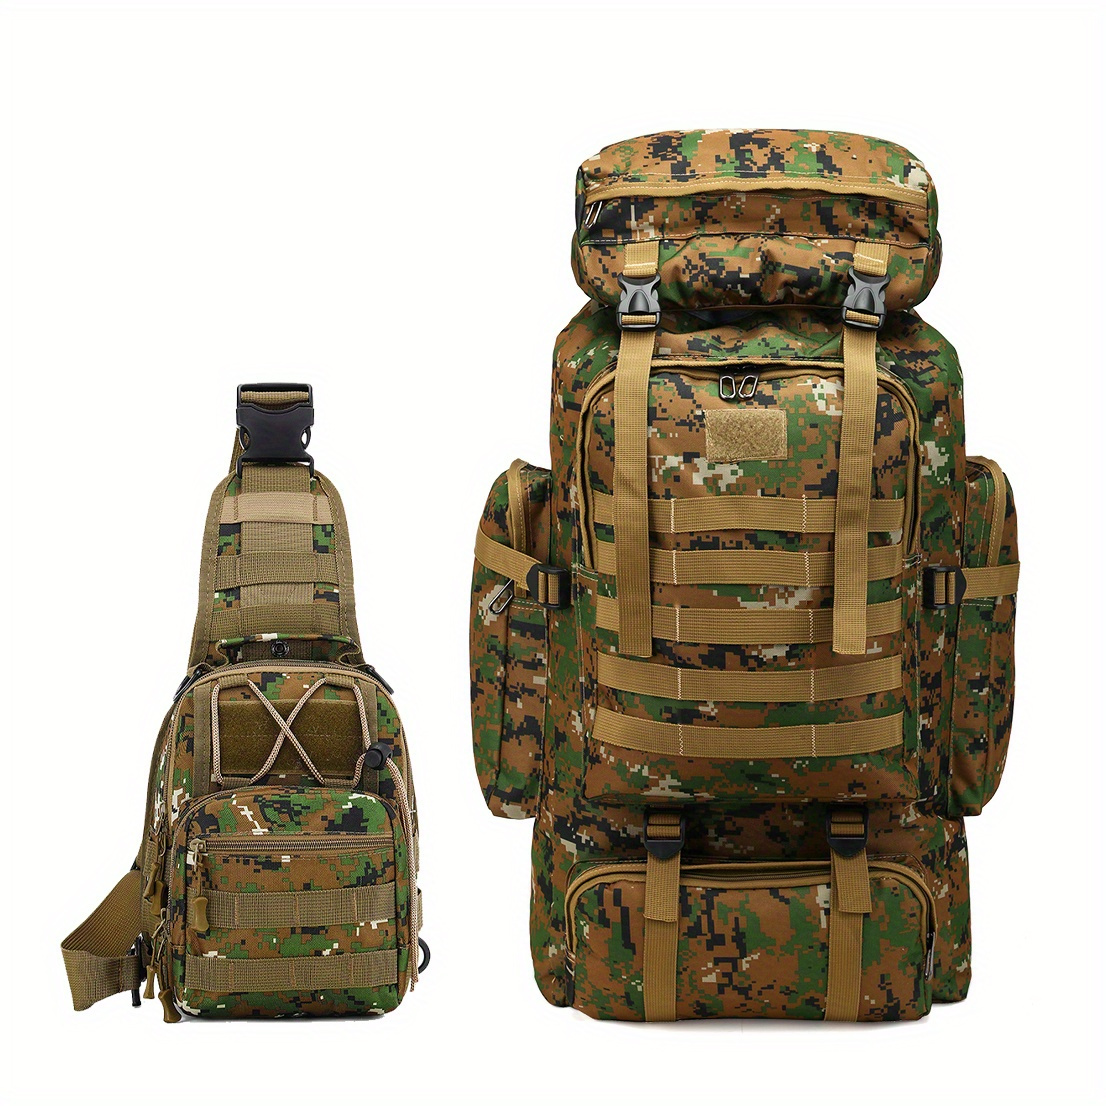 

2 Large-capacity Camouflage Backpack Hiking Bag Outdoor Backpack